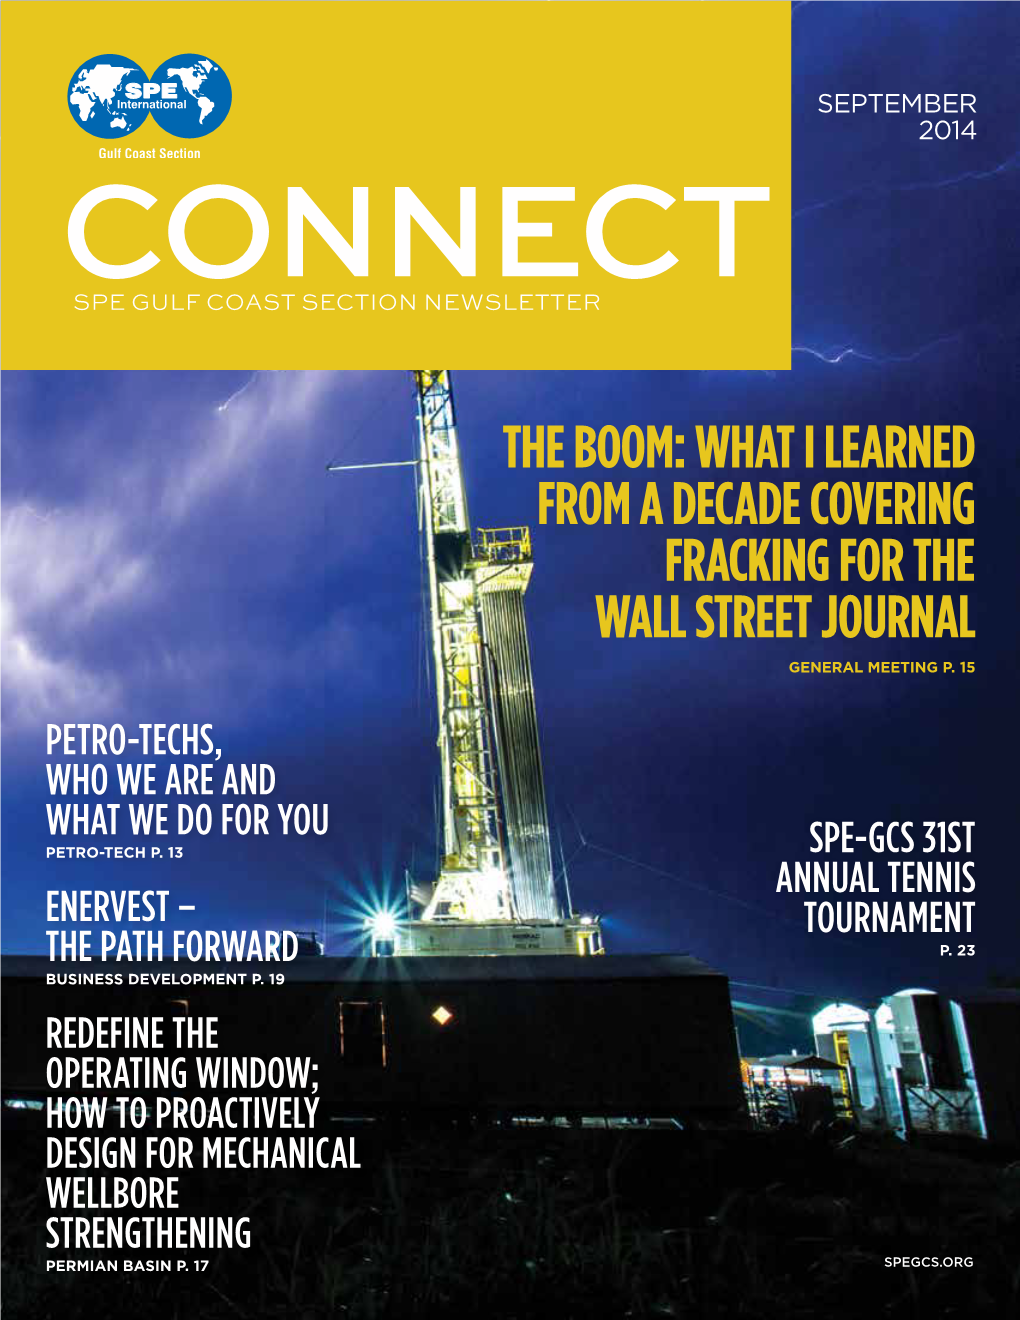 The Boom: What I Learned from a Decade Covering Fracking for the Wall Street Journal General Meeting P